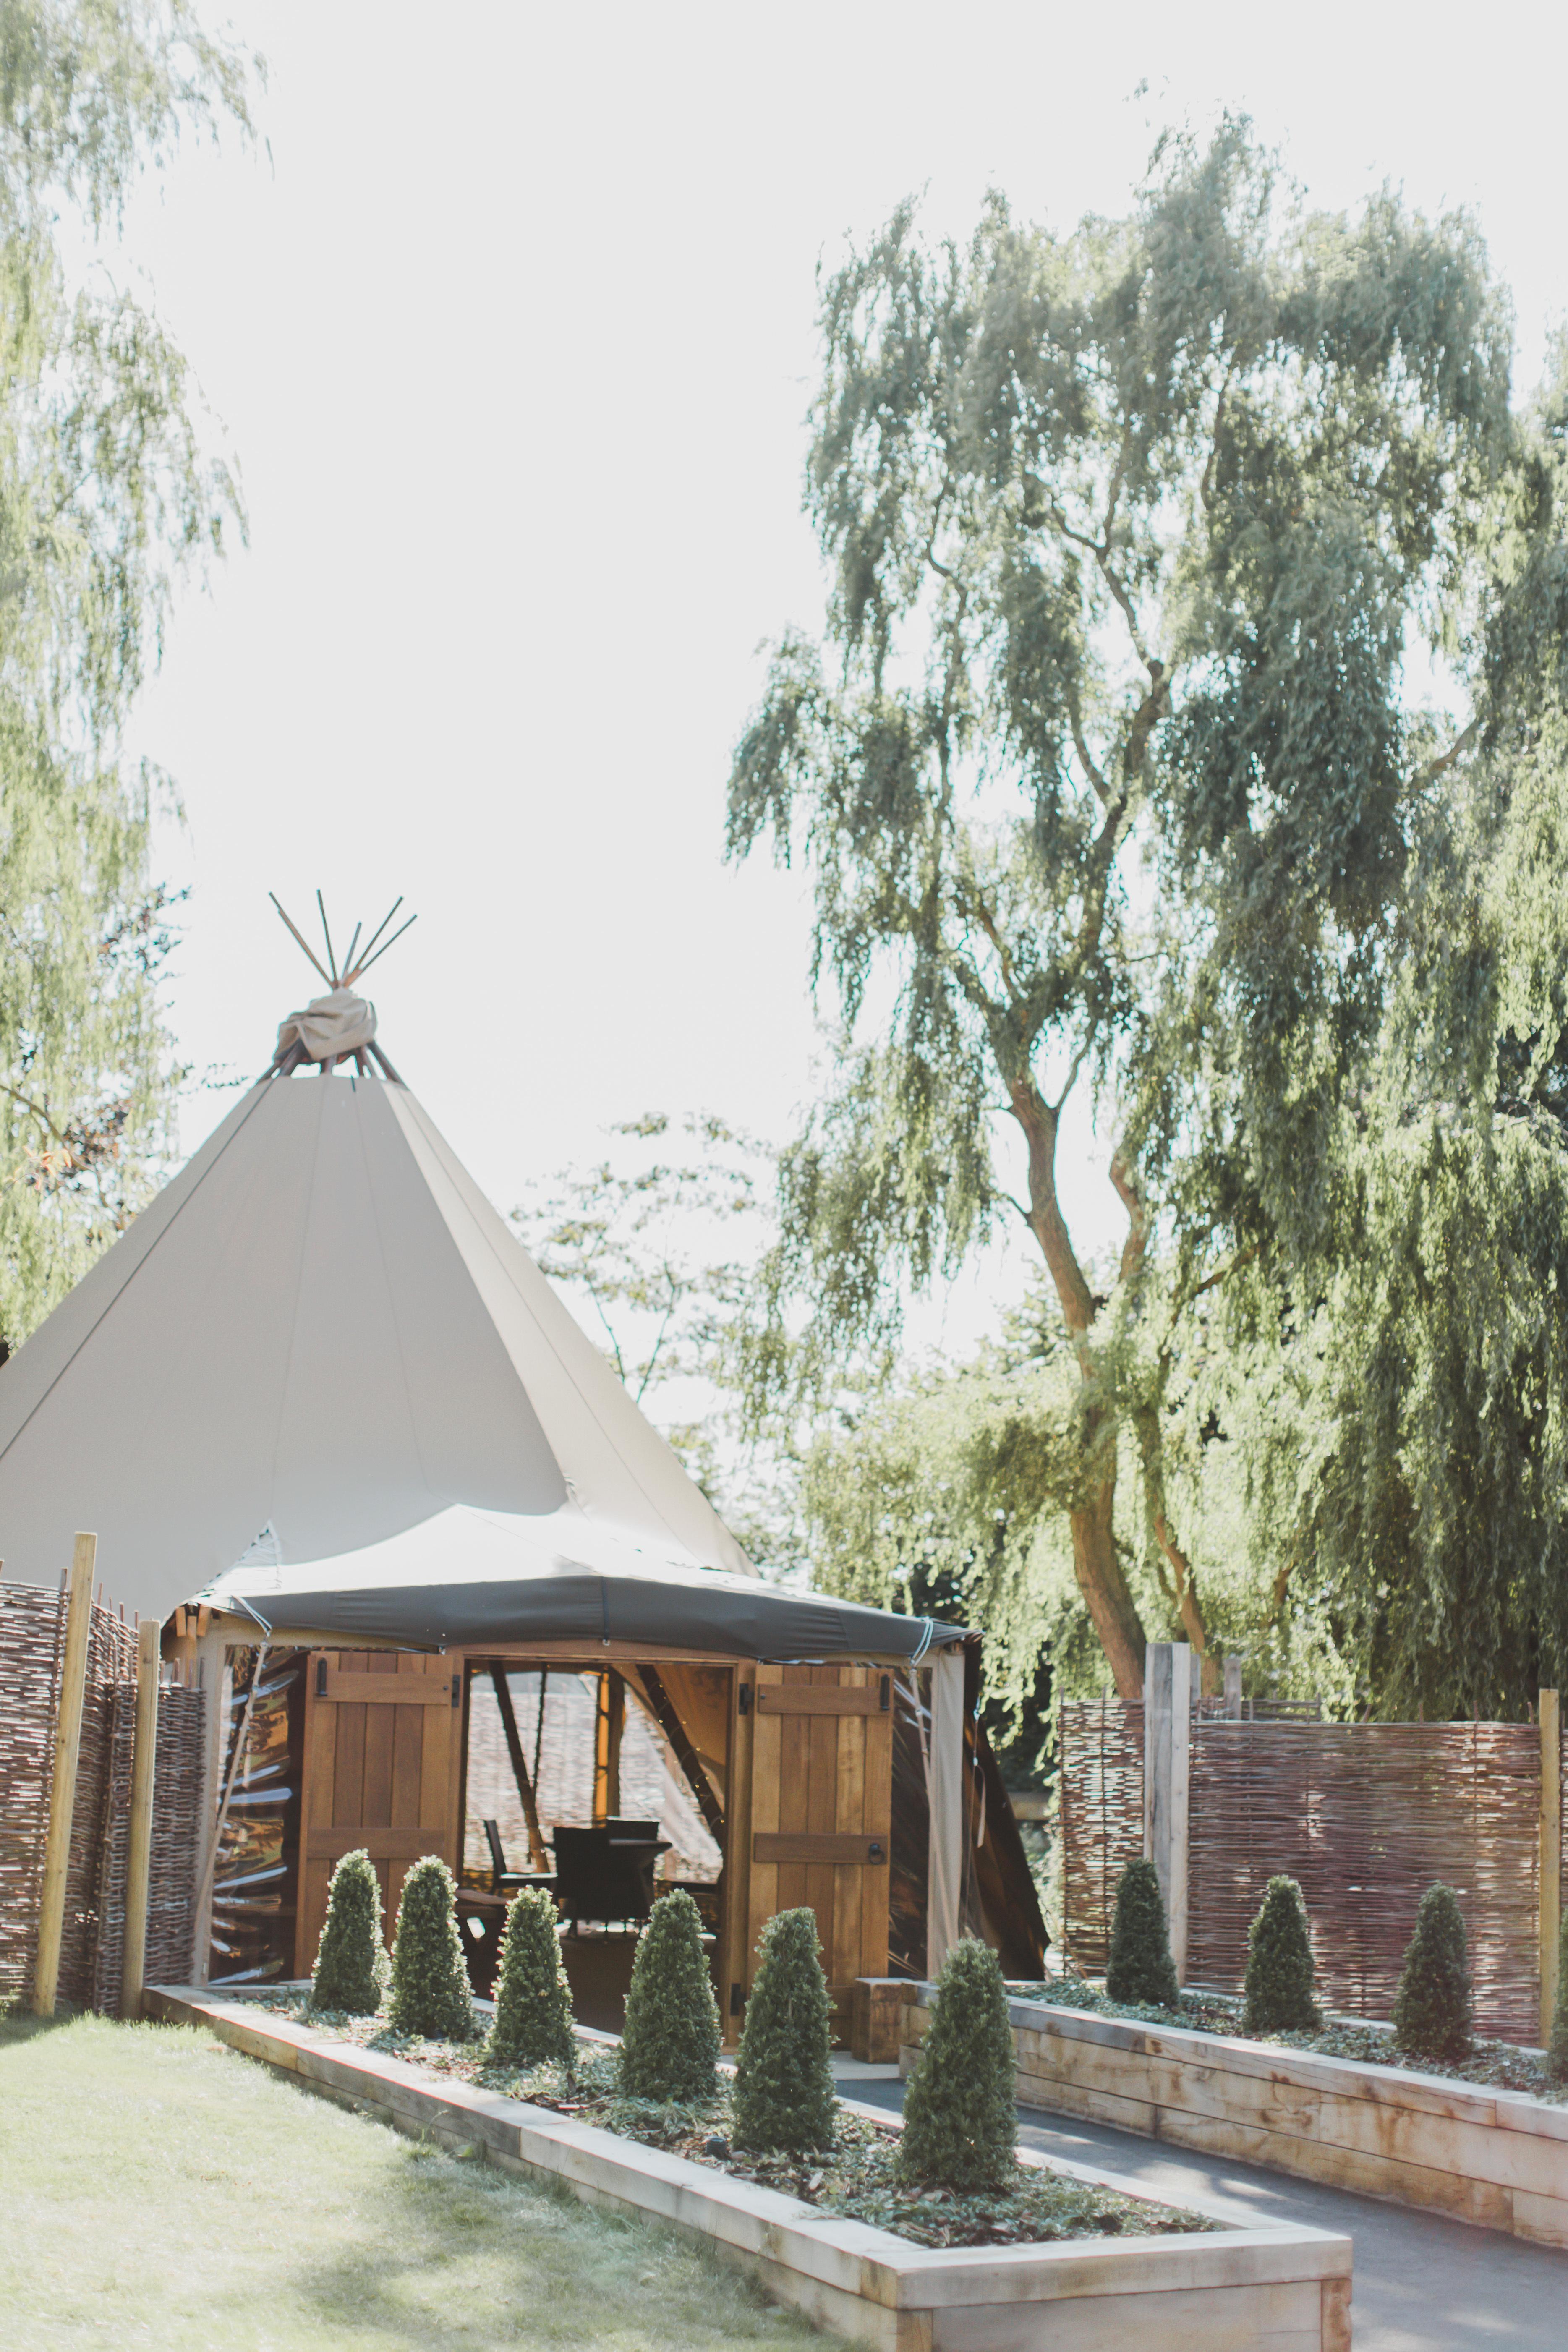 The Woodlands At Hothorpe Hall, Woodlands Tipi & Outdoor Kitchen photo #1